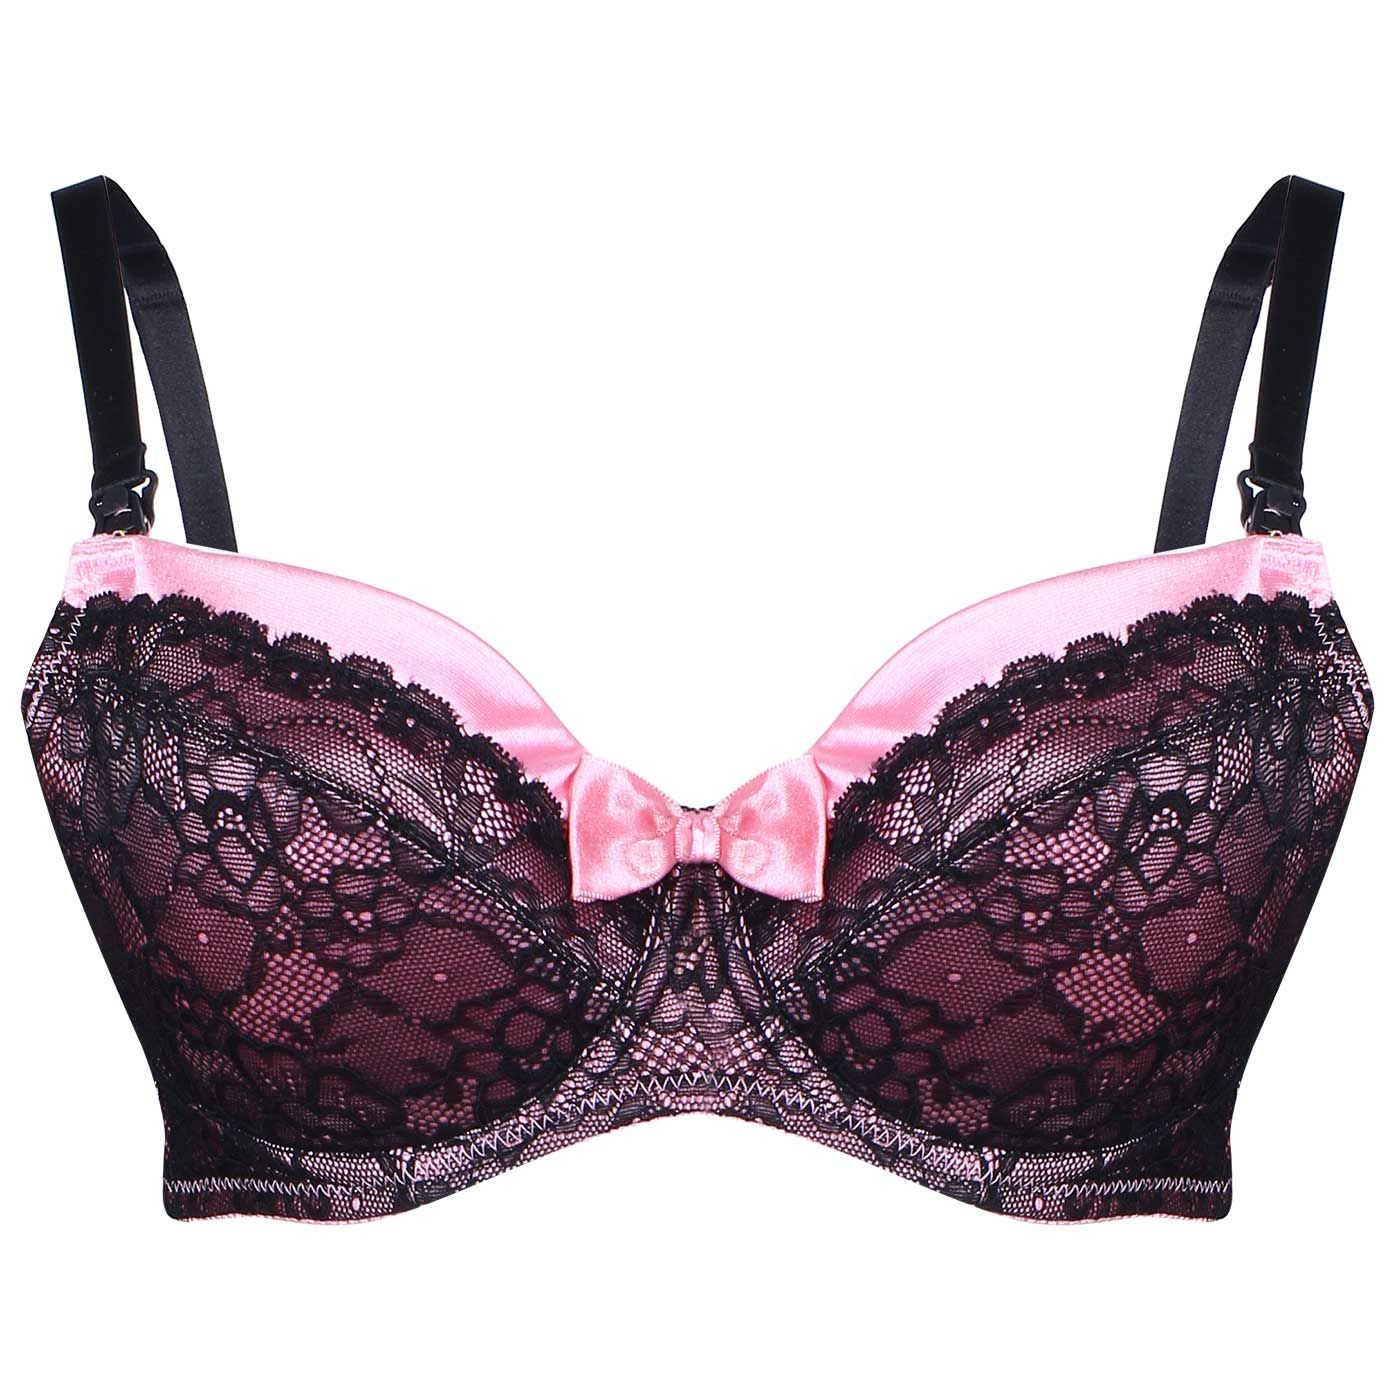 Rosemadame Special Brassiere Black Lace Pink-D80 - 1